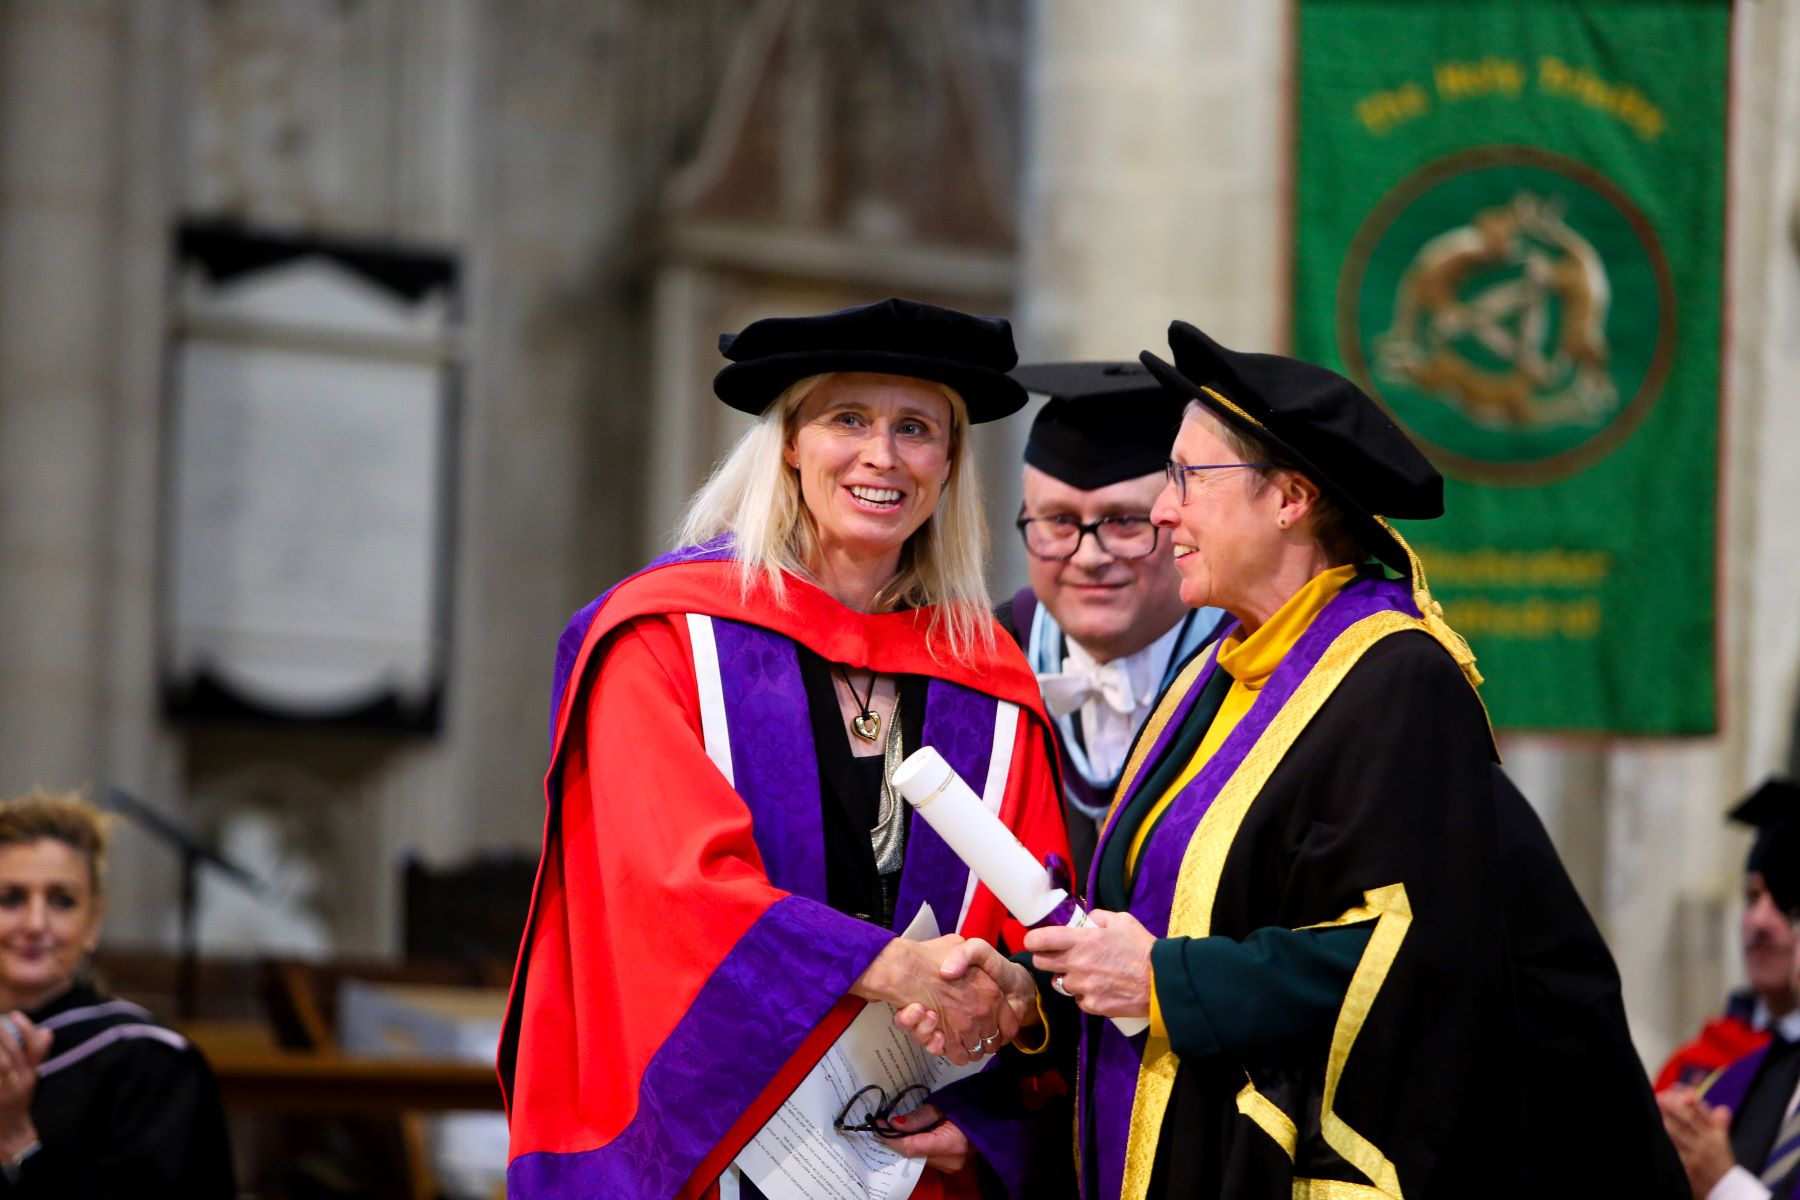 Honorary doctor in red robers receives her scroll from elderly academic in black robes